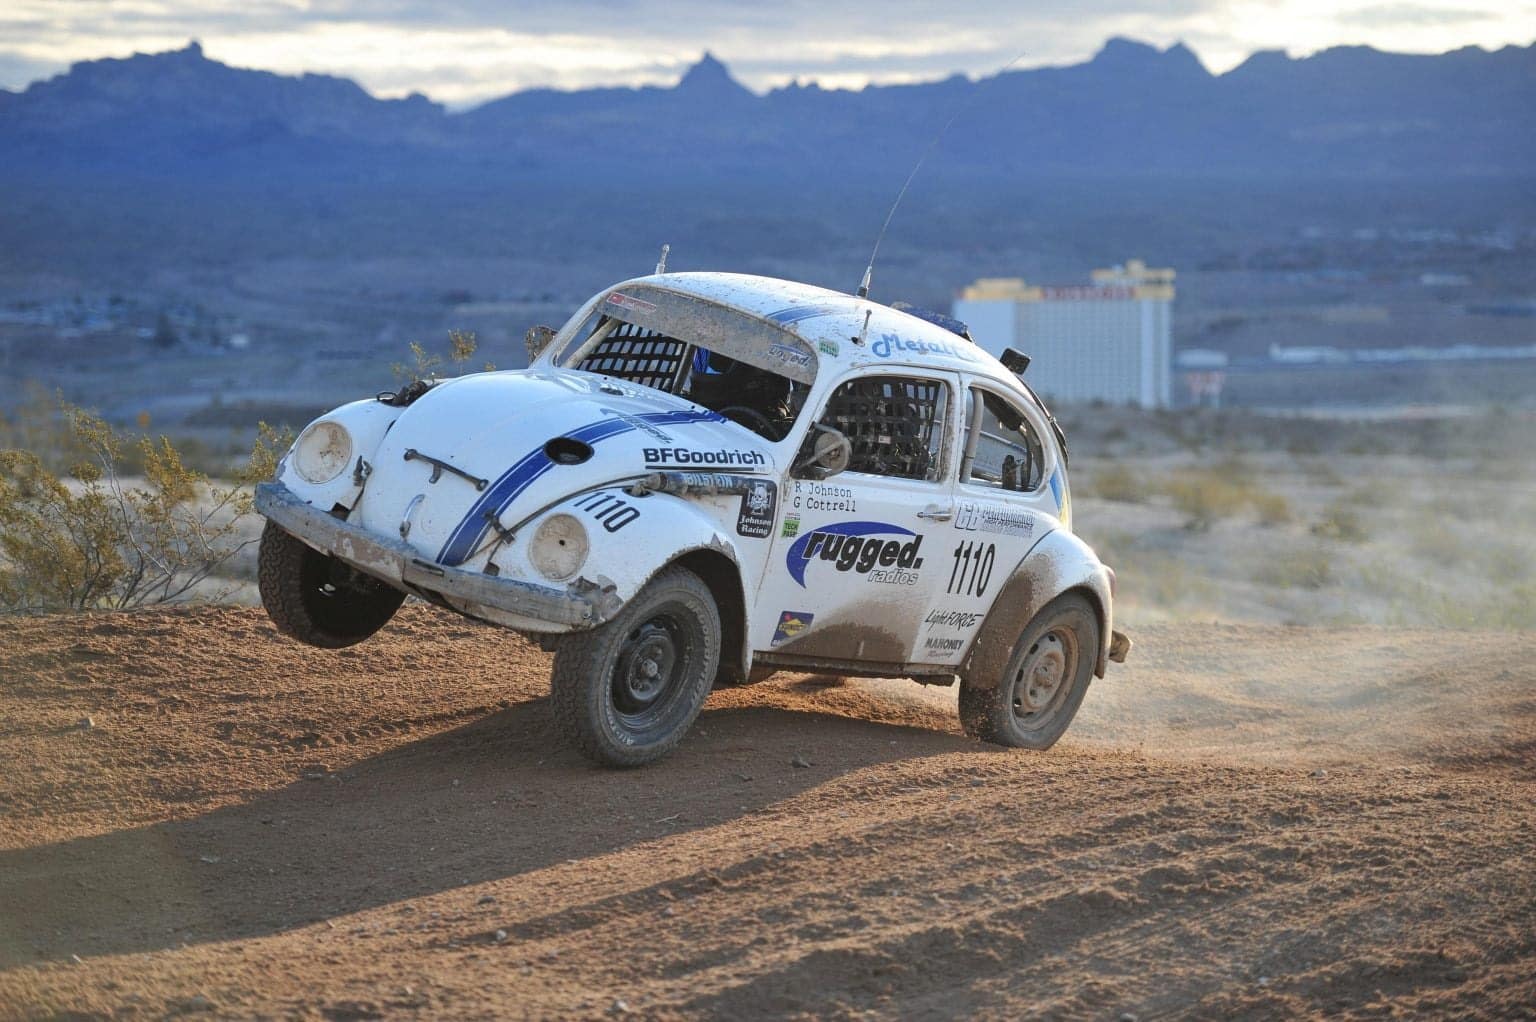 A VW Bettle racing on a dirt track and leaping through the air.